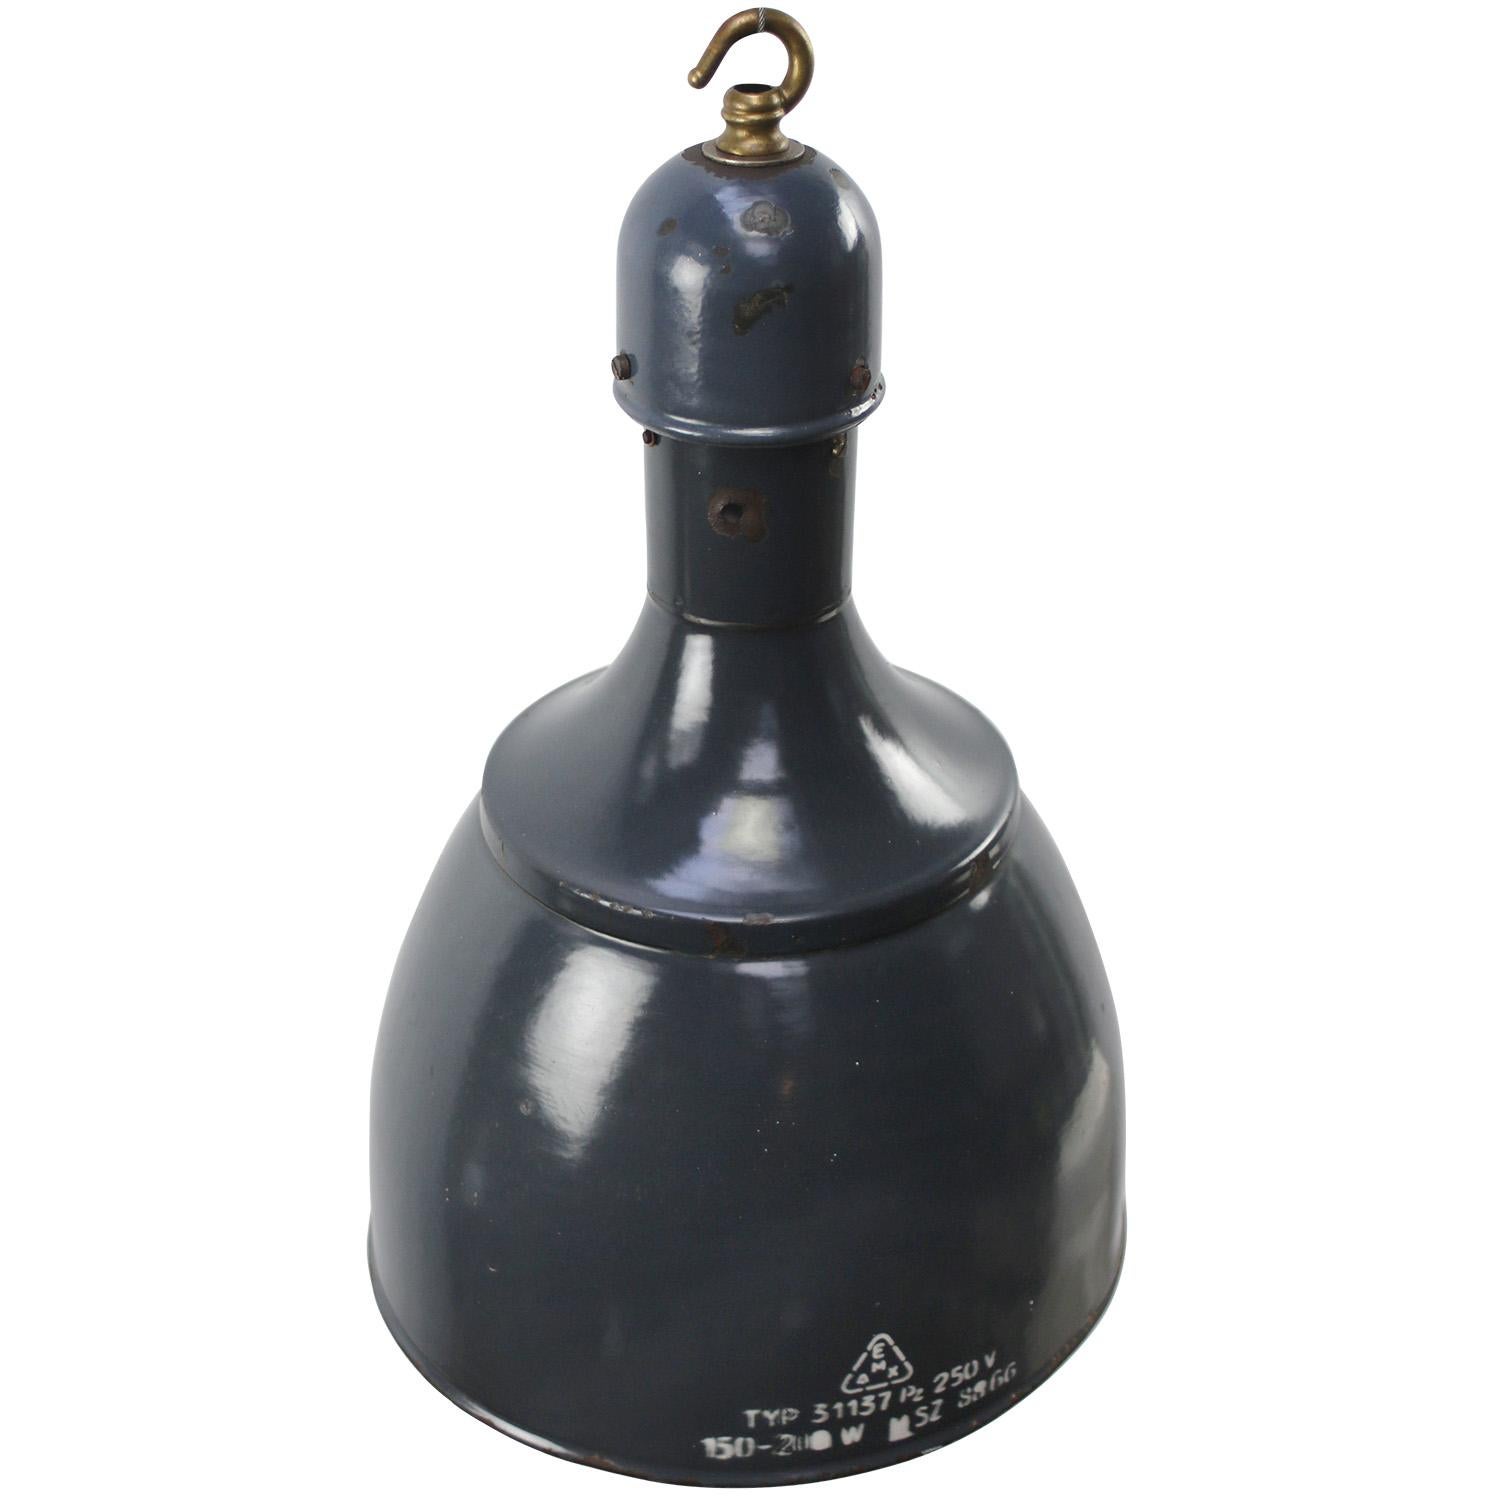 Blue enamel Factory pedant light
White interior, brass top. 

Weight 2.3 kg or 5.1 lb.

Priced per individual item. All lamps have been made suitable by international standards for incandescent light bulbs, energy-efficient and LED bulbs. E26/E27